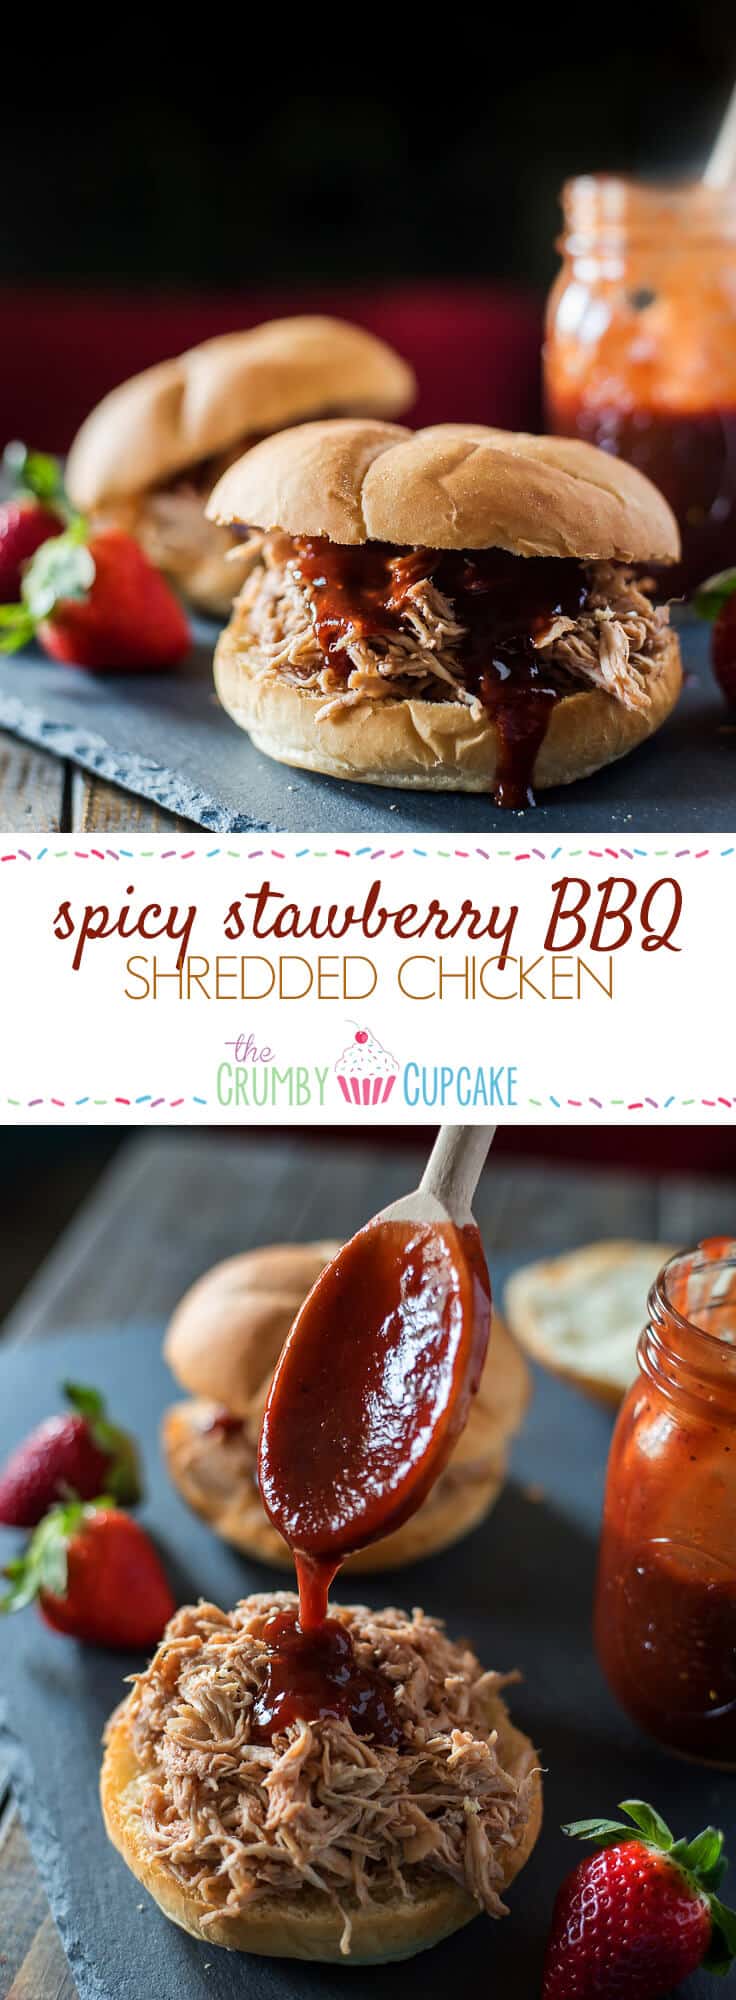 Looking for a fast, delish dinner celebrating the best berries you'll eat all year? This Spicy Strawberry BBQ Shredded Chicken is a unique way to showcase the versatility of strawberries - and can be ready in less than 30 minutes!